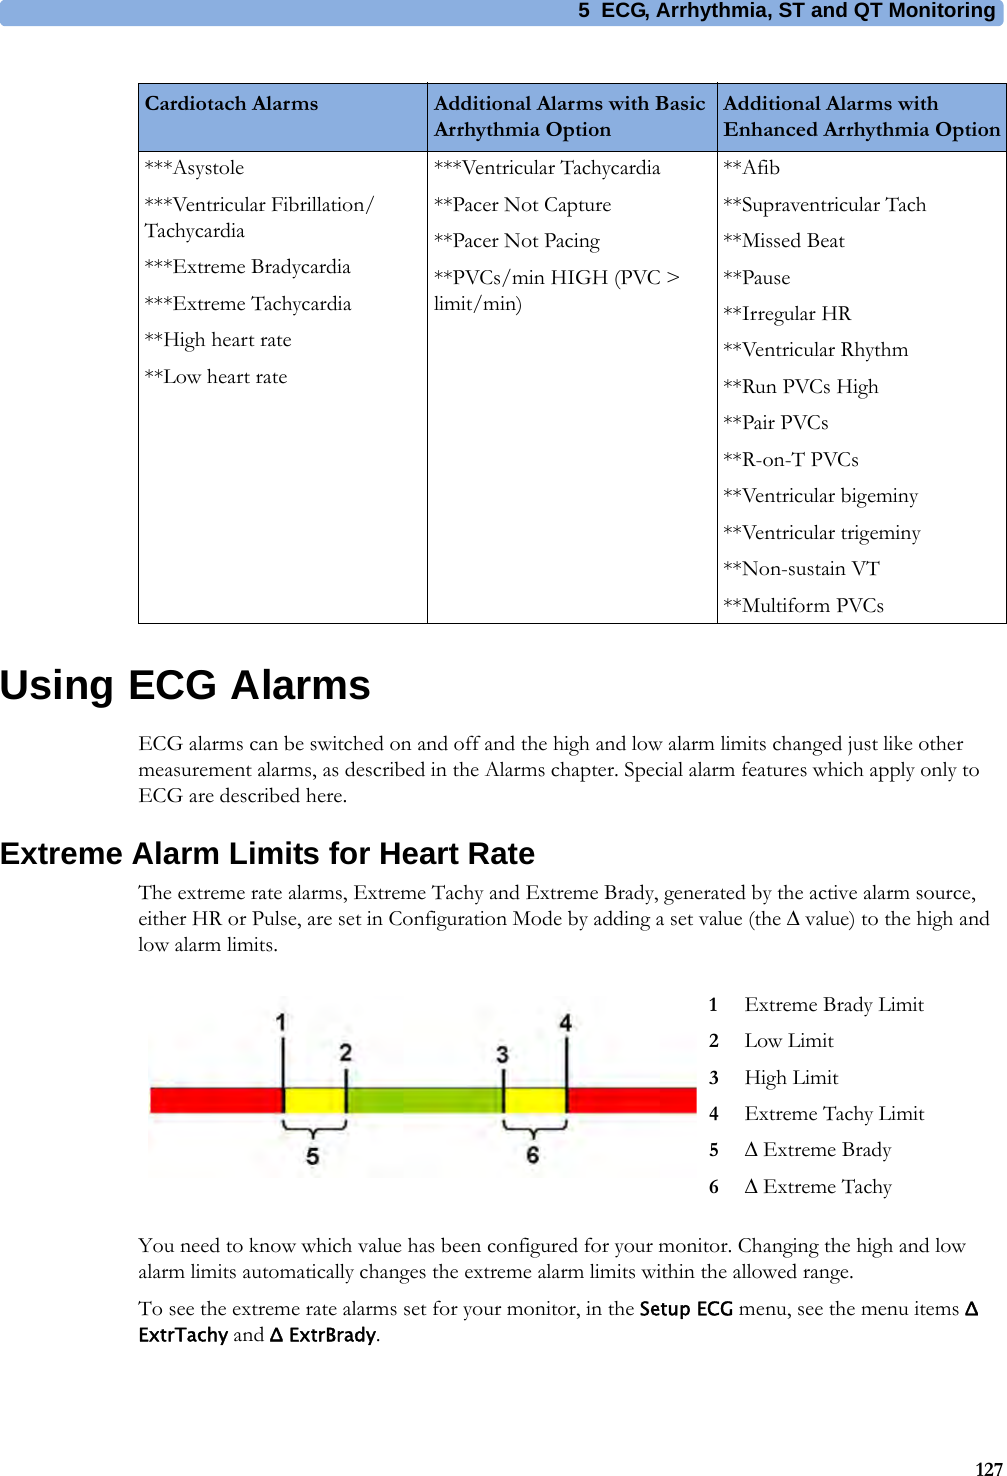 5 ECG, Arrhythmia, ST and QT Monitoring127Using ECG AlarmsECG alarms can be switched on and off and the high and low alarm limits changed just like other measurement alarms, as described in the Alarms chapter. Special alarm features which apply only to ECG are described here.Extreme Alarm Limits for Heart RateThe extreme rate alarms, Extreme Tachy and Extreme Brady, generated by the active alarm source, either HR or Pulse, are set in Configuration Mode by adding a set value (the Δ value) to the high and low alarm limits.You need to know which value has been configured for your monitor. Changing the high and low alarm limits automatically changes the extreme alarm limits within the allowed range.To see the extreme rate alarms set for your monitor, in the Setup ECG menu, see the menu items Δ ExtrTachy and Δ ExtrBrady.Cardiotach Alarms Additional Alarms with Basic Arrhythmia OptionAdditional Alarms with Enhanced Arrhythmia Option***Asystole***Ventricular Fibrillation/Tachycardia***Extreme Bradycardia***Extreme Tachycardia**High heart rate**Low heart rate***Ventricular Tachycardia**Pacer Not Capture**Pacer Not Pacing**PVCs/min HIGH (PVC &gt; limit/min)**Afib**Supraventricular Tach**Missed Beat**Pause**Irregular HR**Ventricular Rhythm**Run PVCs High**Pair PVCs**R-on-T PVCs**Ventricular bigeminy**Ventricular trigeminy**Non-sustain VT**Multiform PVCs1Extreme Brady Limit2Low Limit3High Limit4Extreme Tachy Limit5Δ Extreme Brady6Δ Extreme Tachy